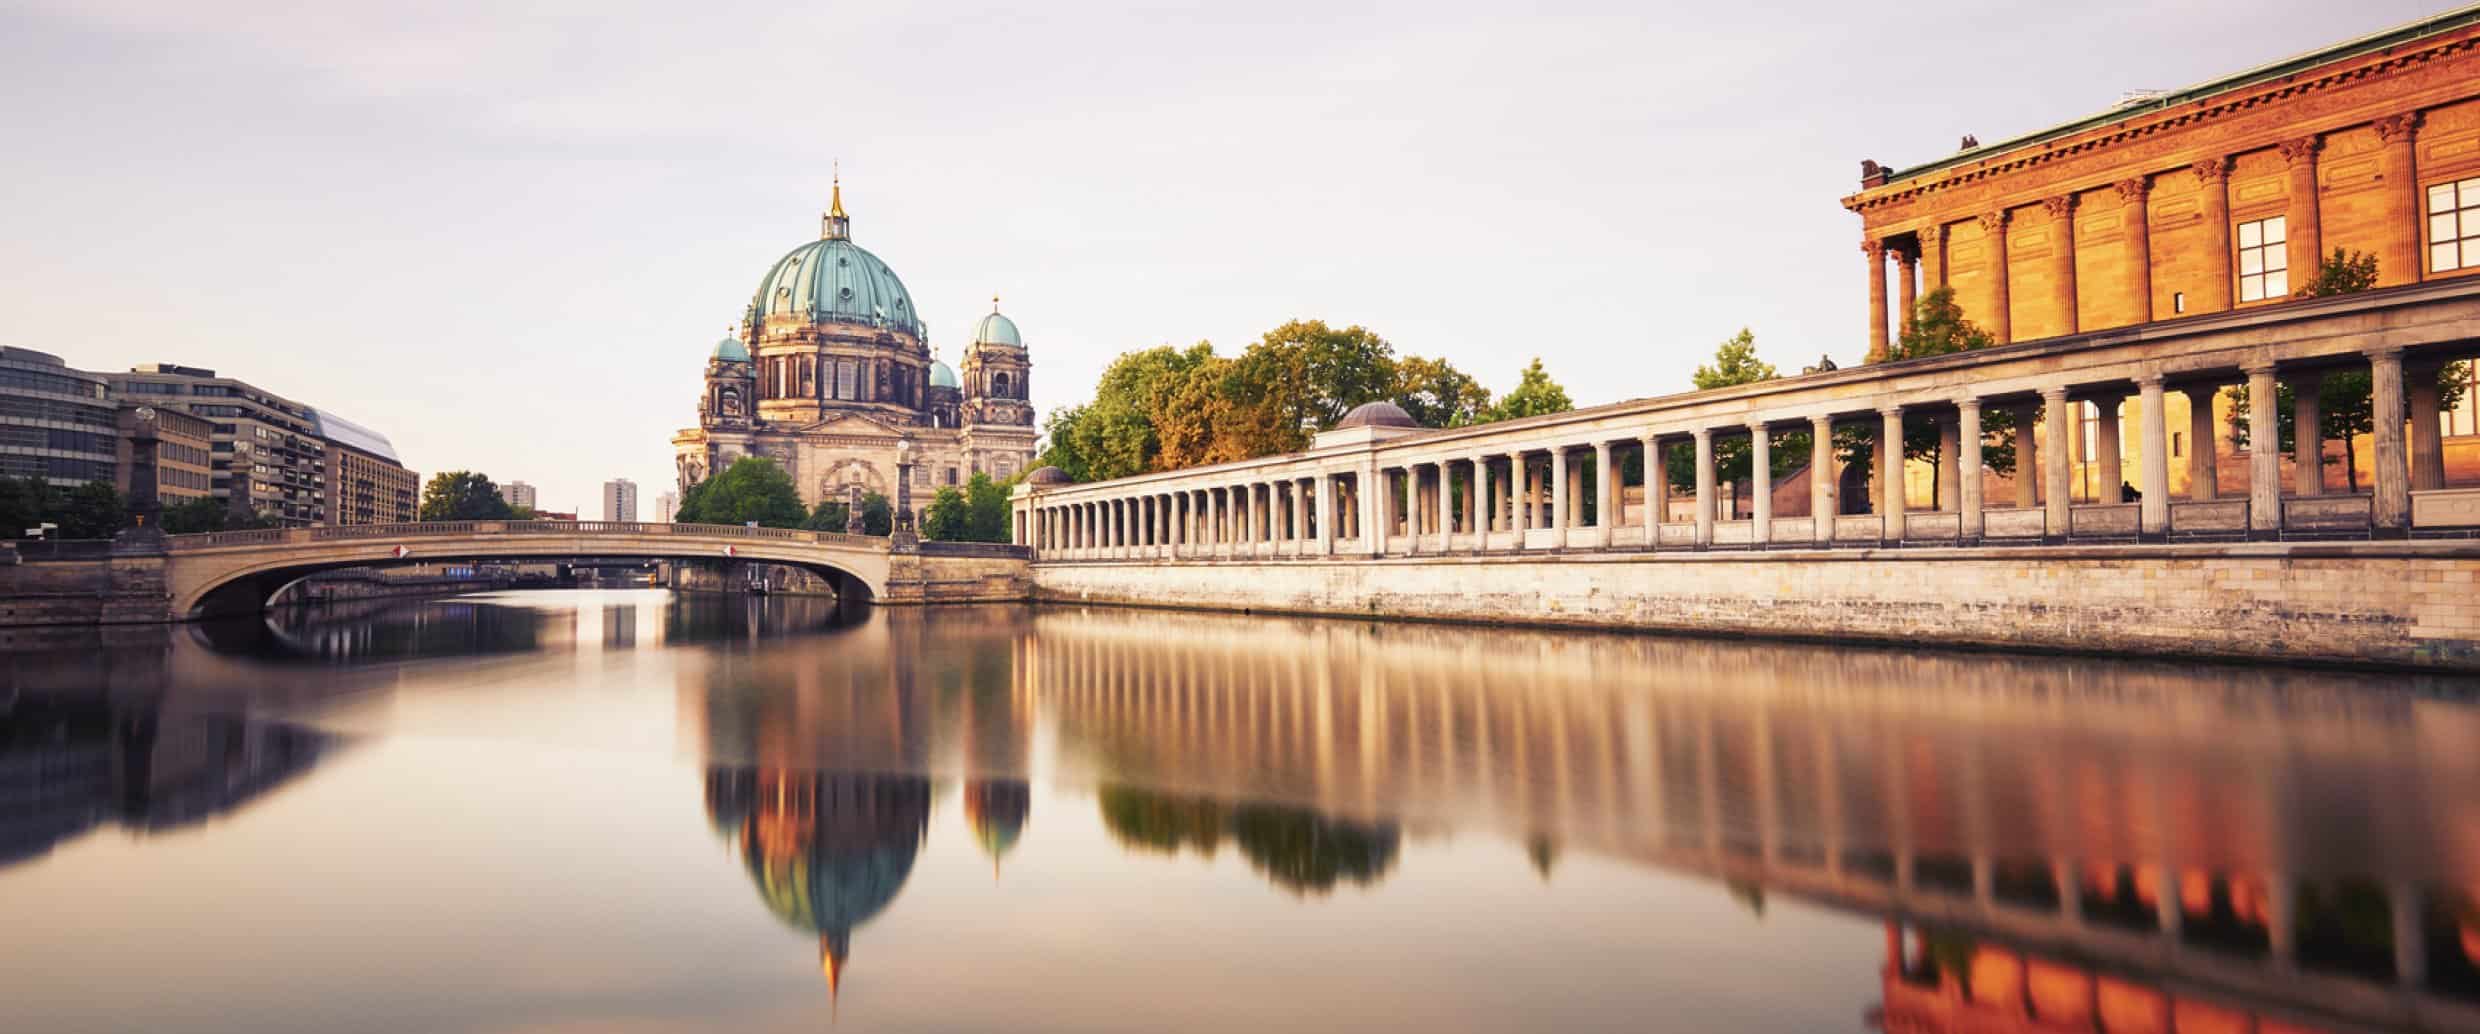 Berlin river and Berliner Dom near the museum island